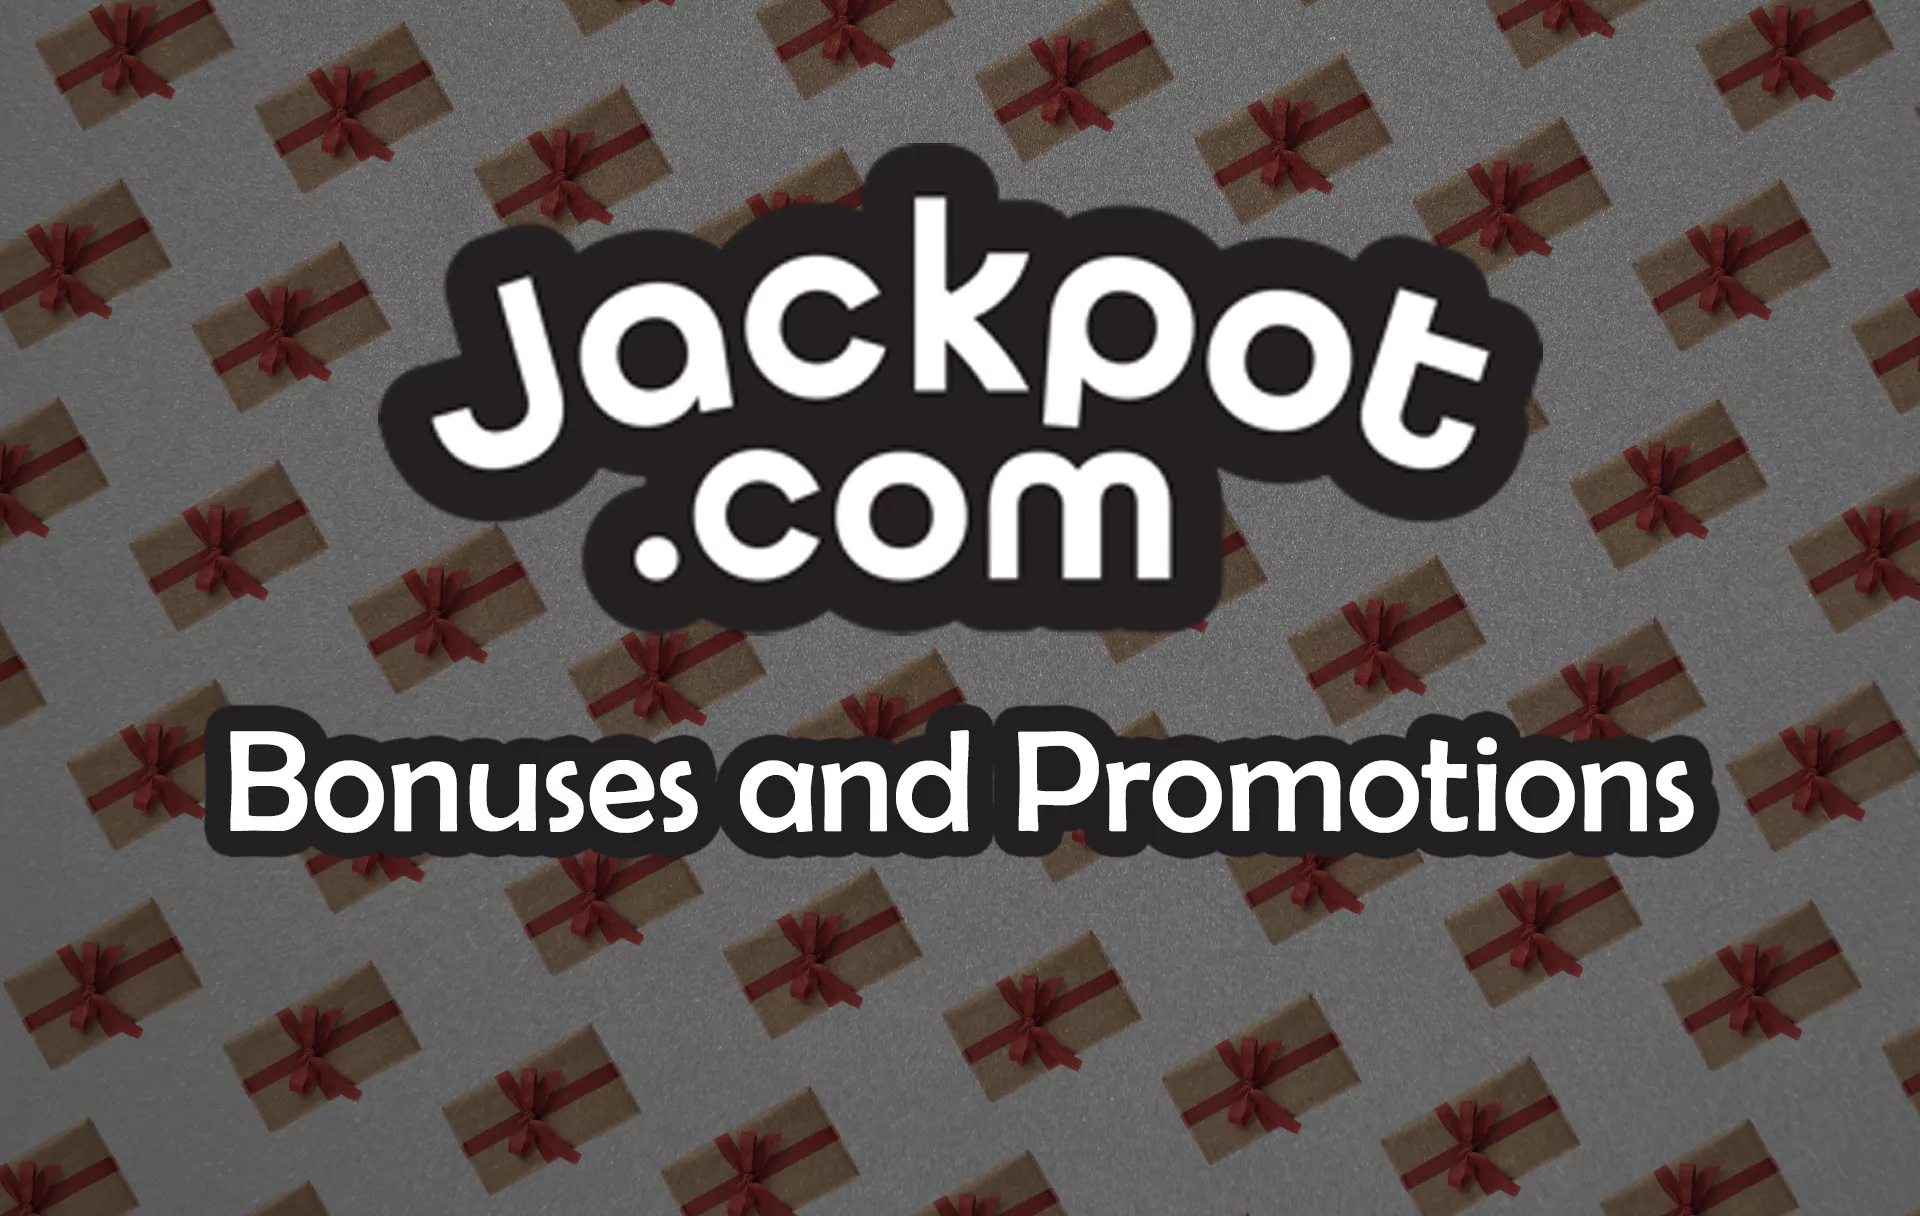 Follow news and actual promotions to have time to get a bonus.